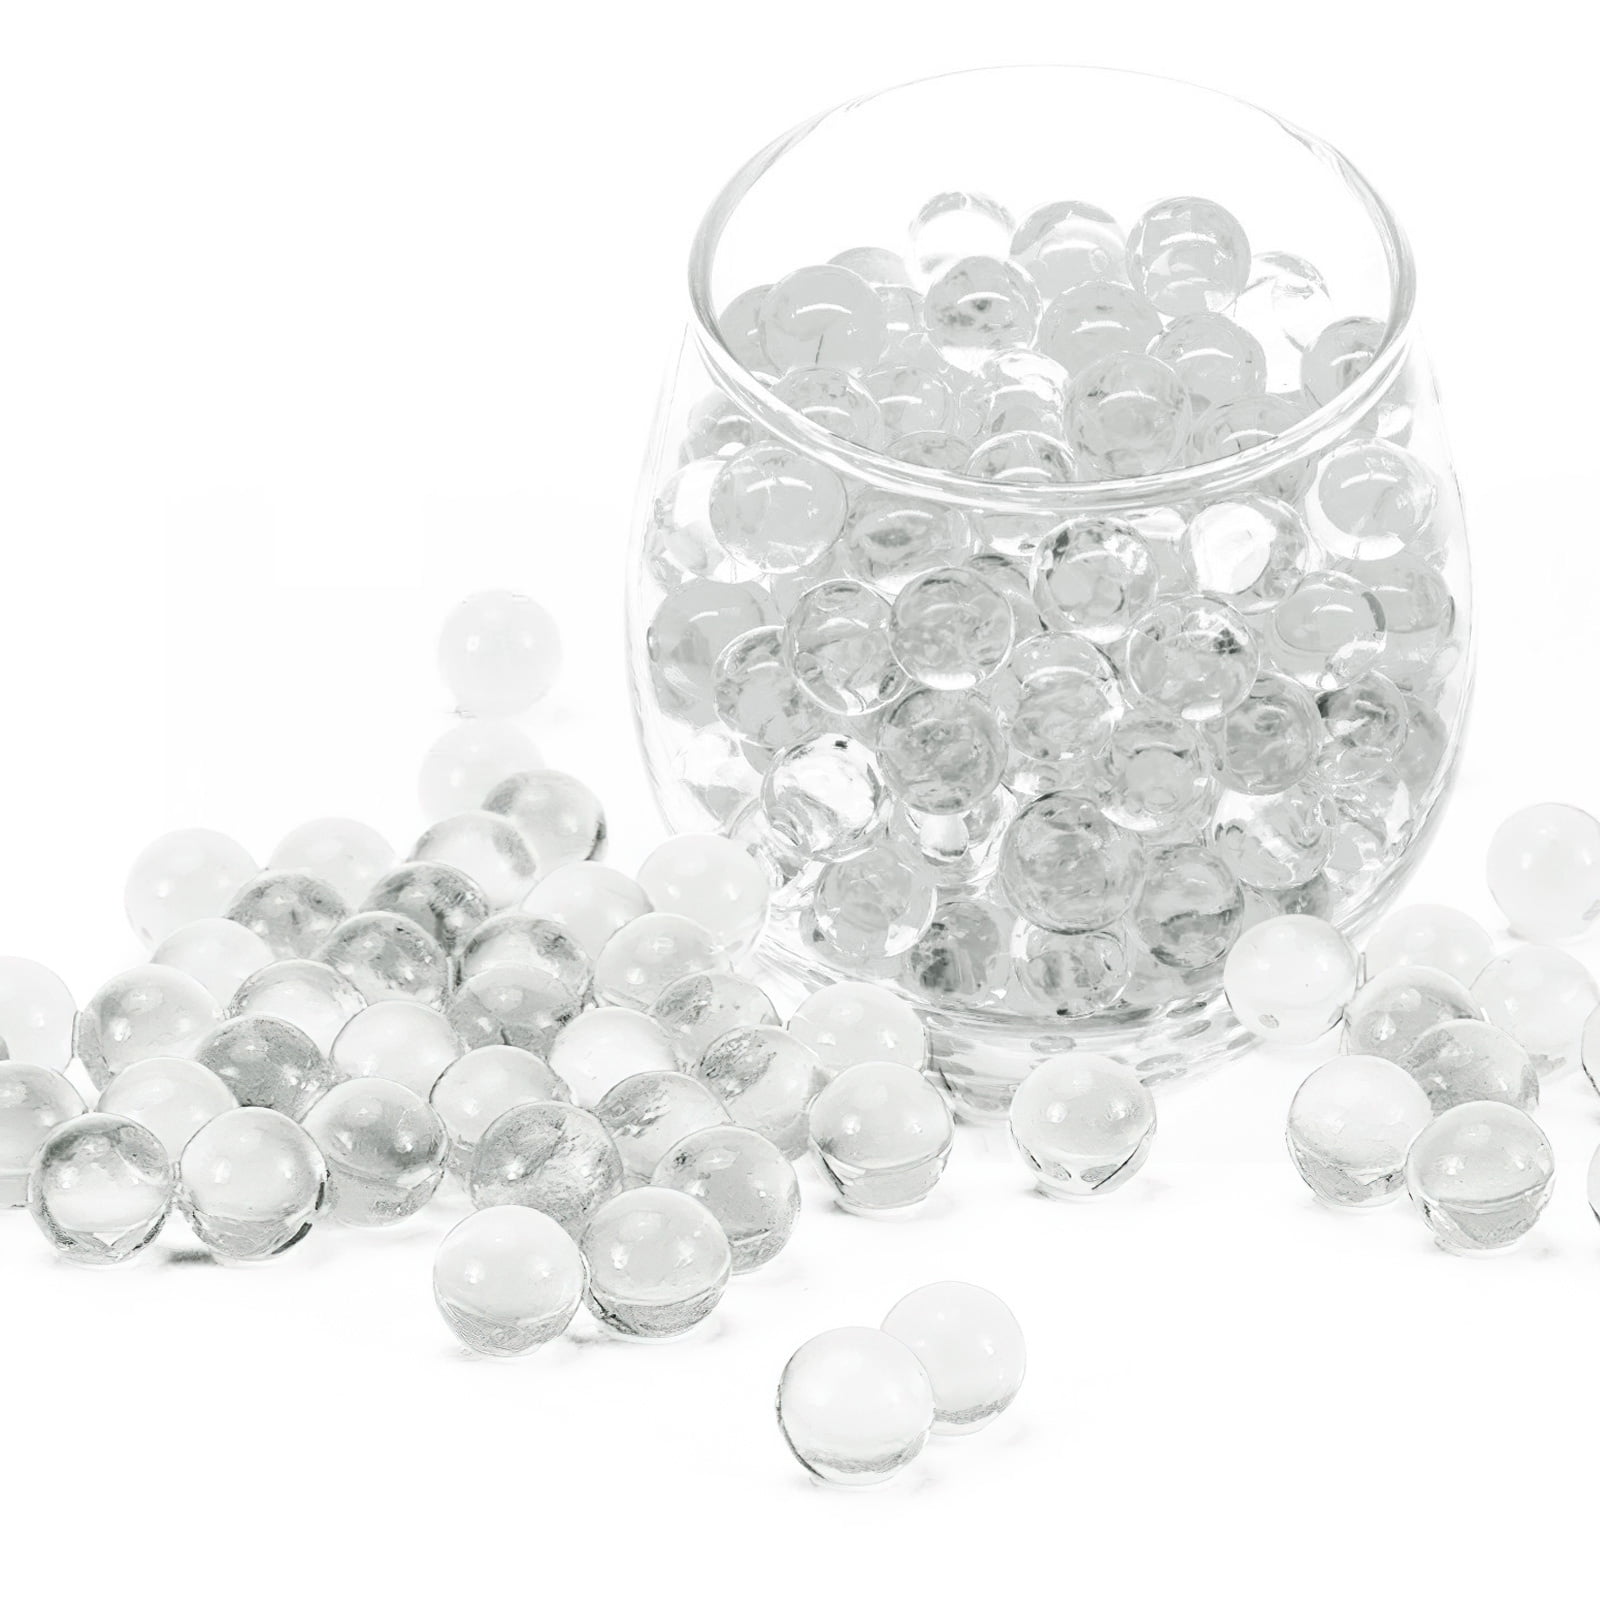 Deco beads water crystal accents ,Water Beads Vase Filler